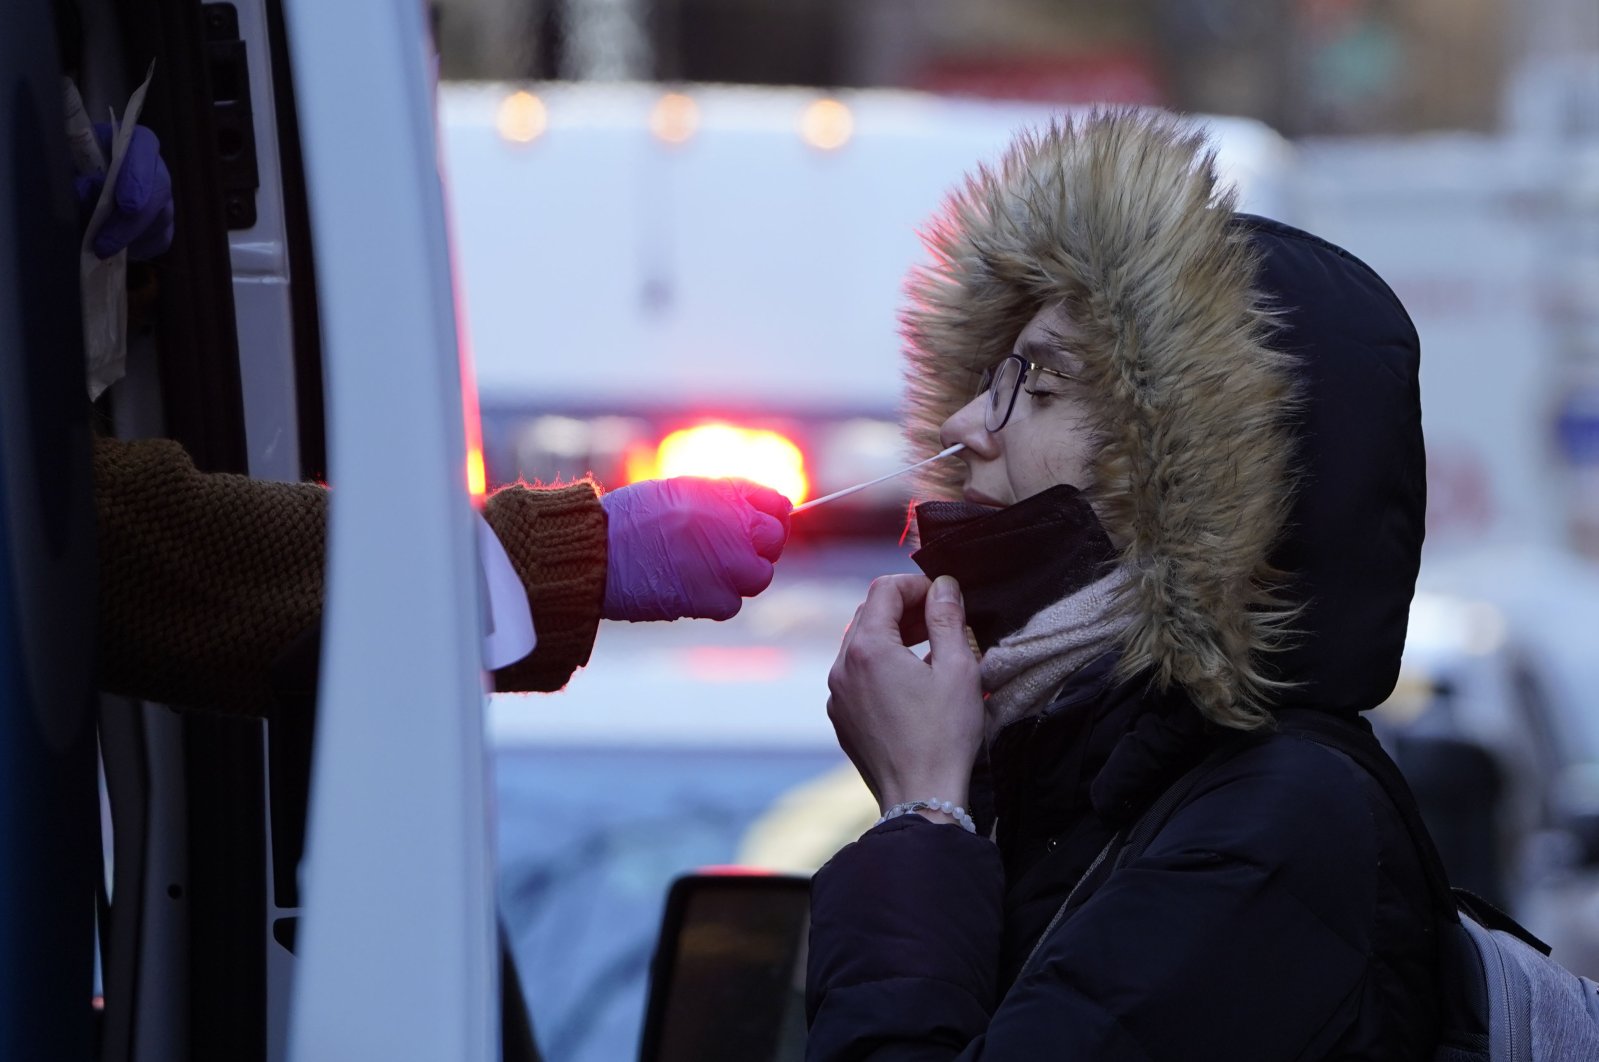 A woman wearing a winter coat gets tested for COVID-19 at a mobile testing site in New York, U.S., Jan. 11, 2022.  (AP Photo/Seth Wenig)